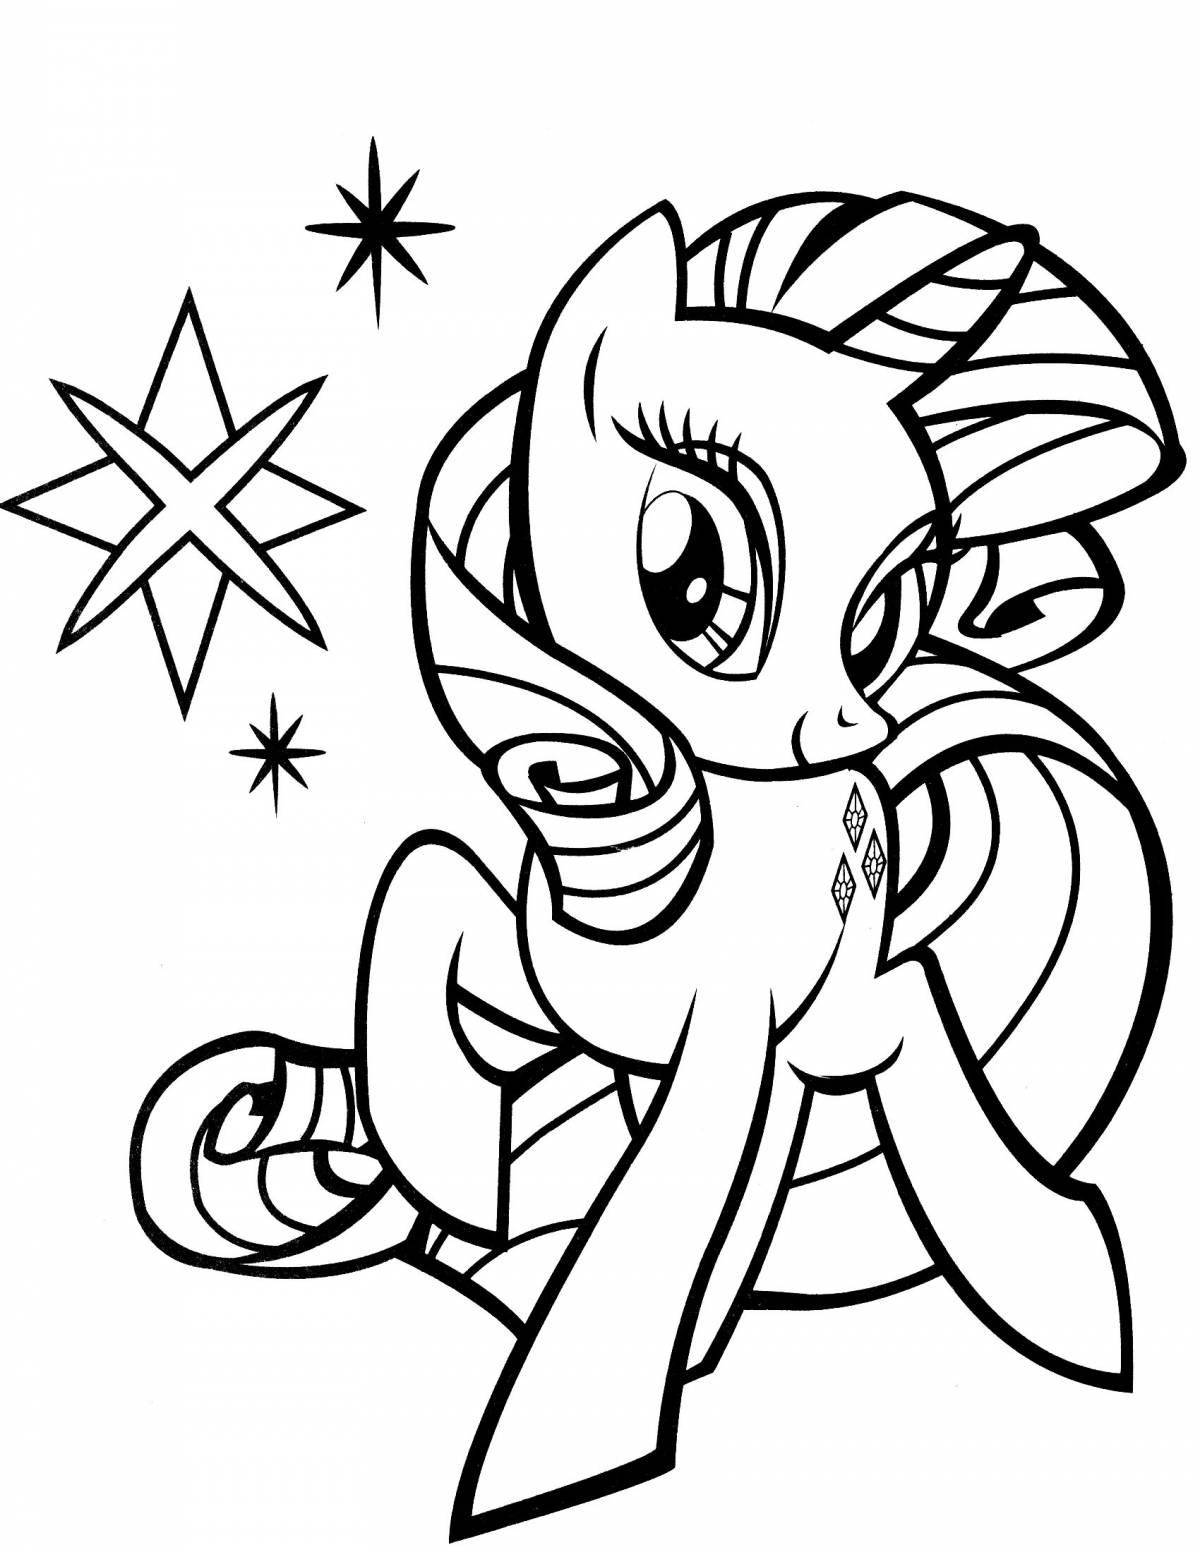 Coloring page live little pony